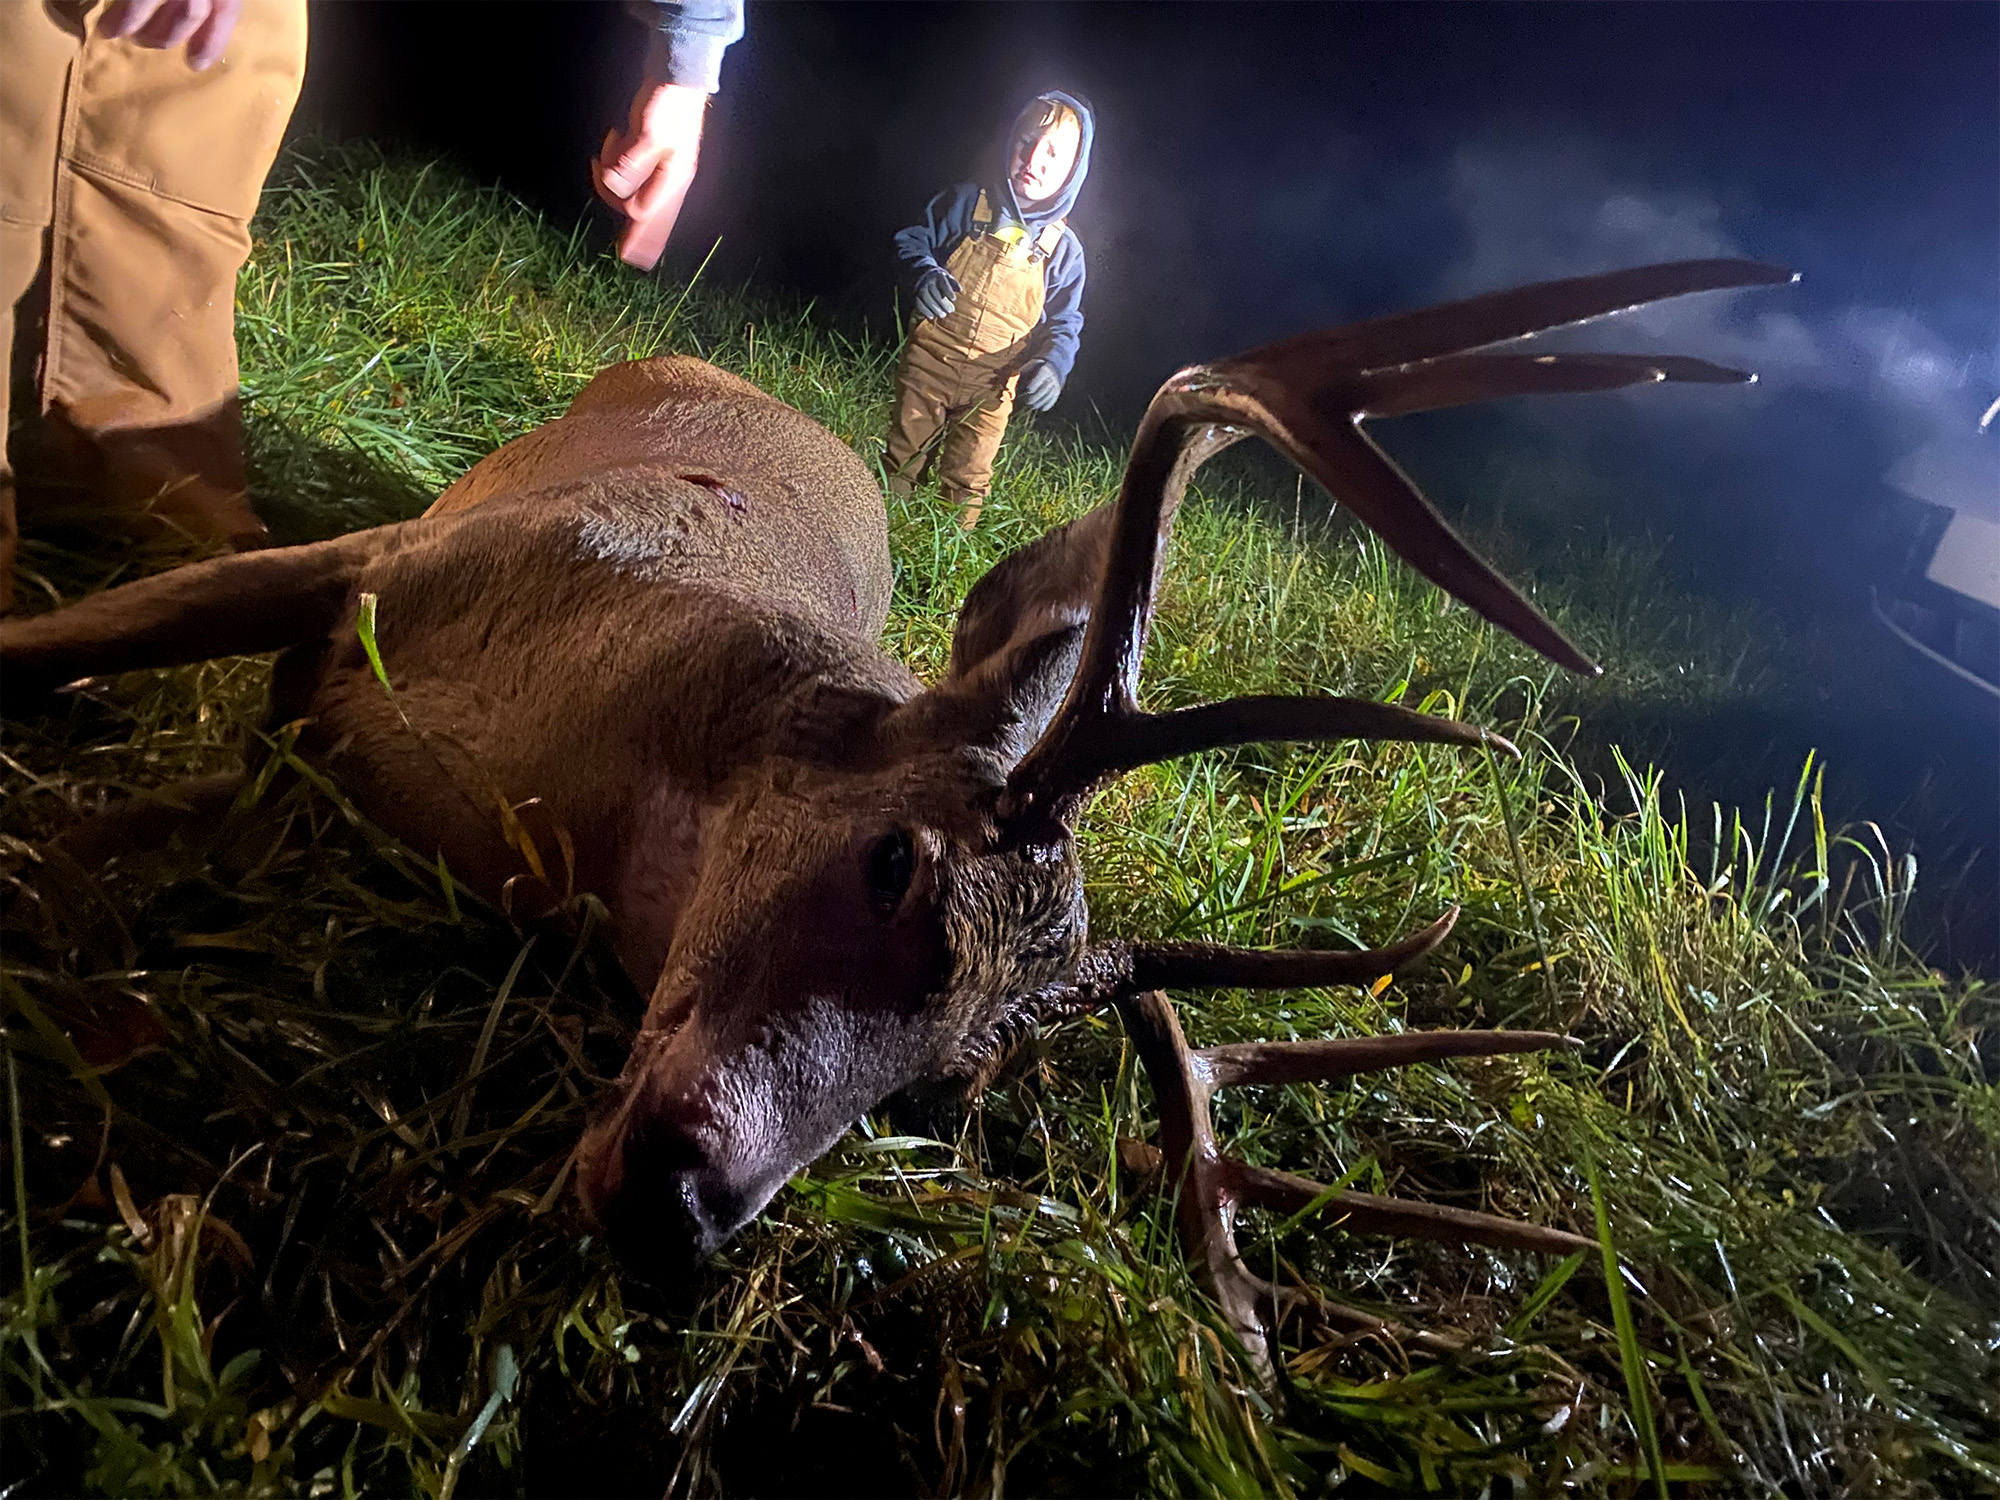 ohio bowhunter 10 pt bests old man